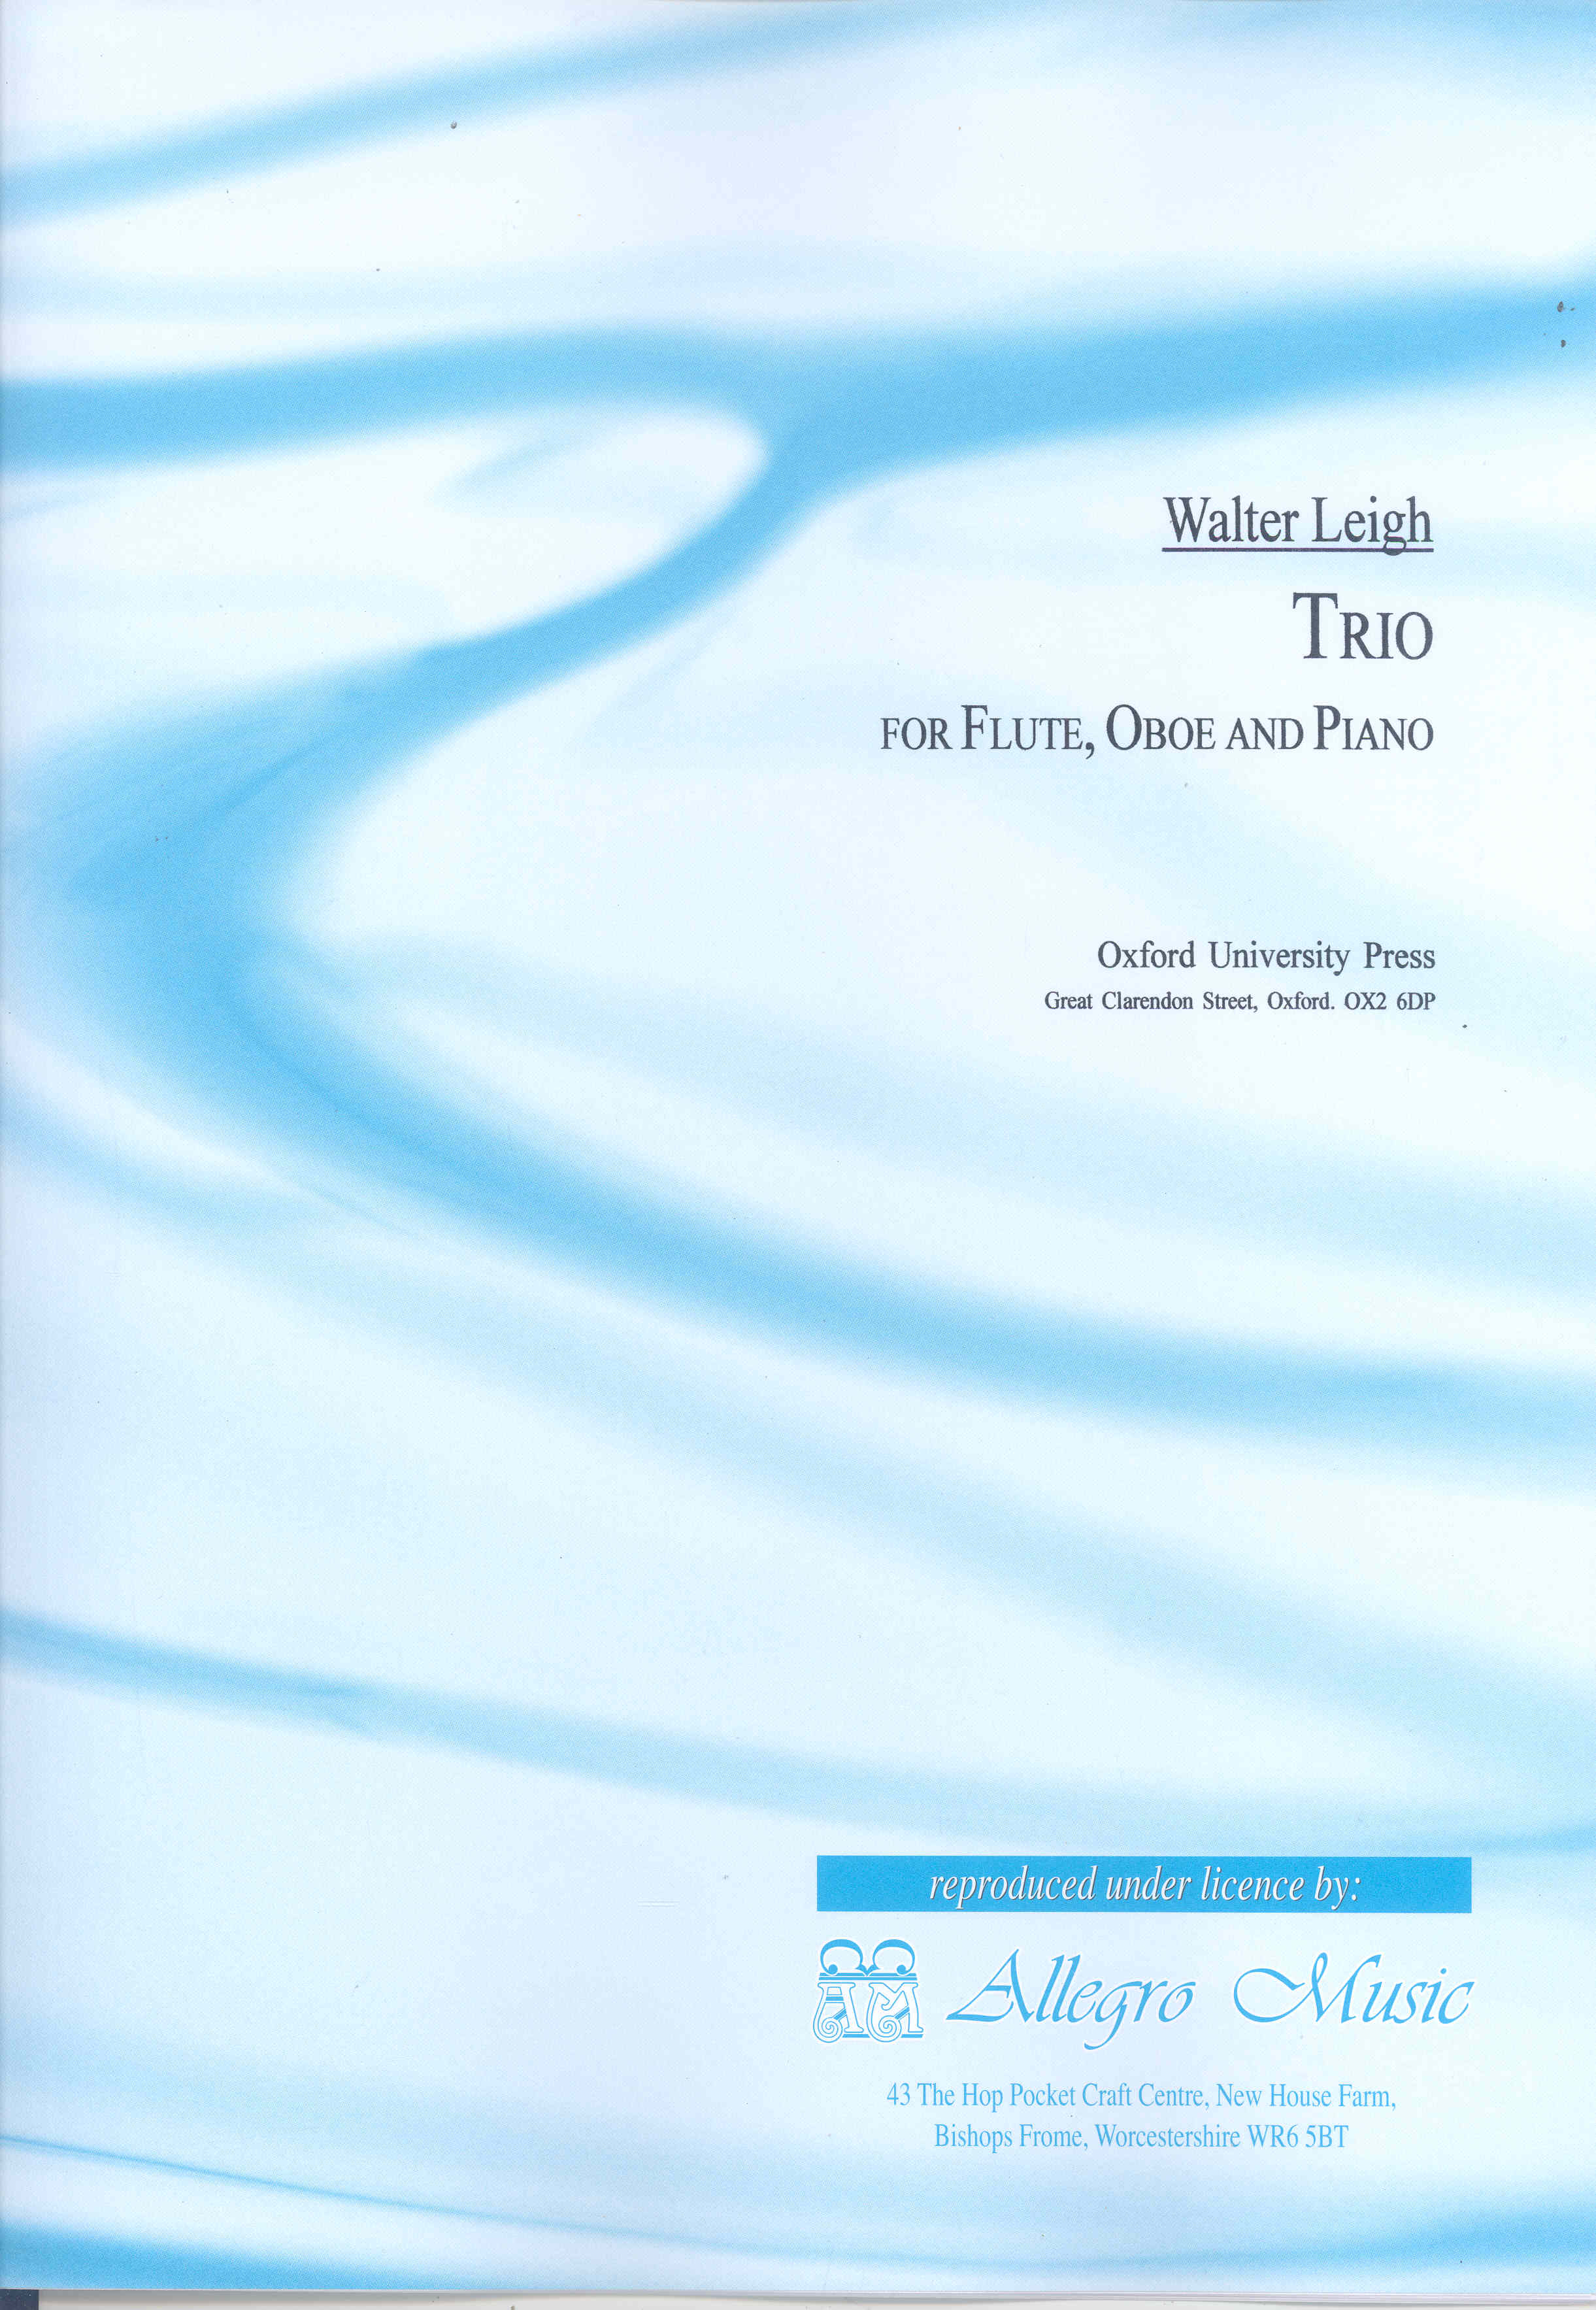 Leigh Trio Flute/oboe/piano Sc/pts Archive Sheet Music Songbook